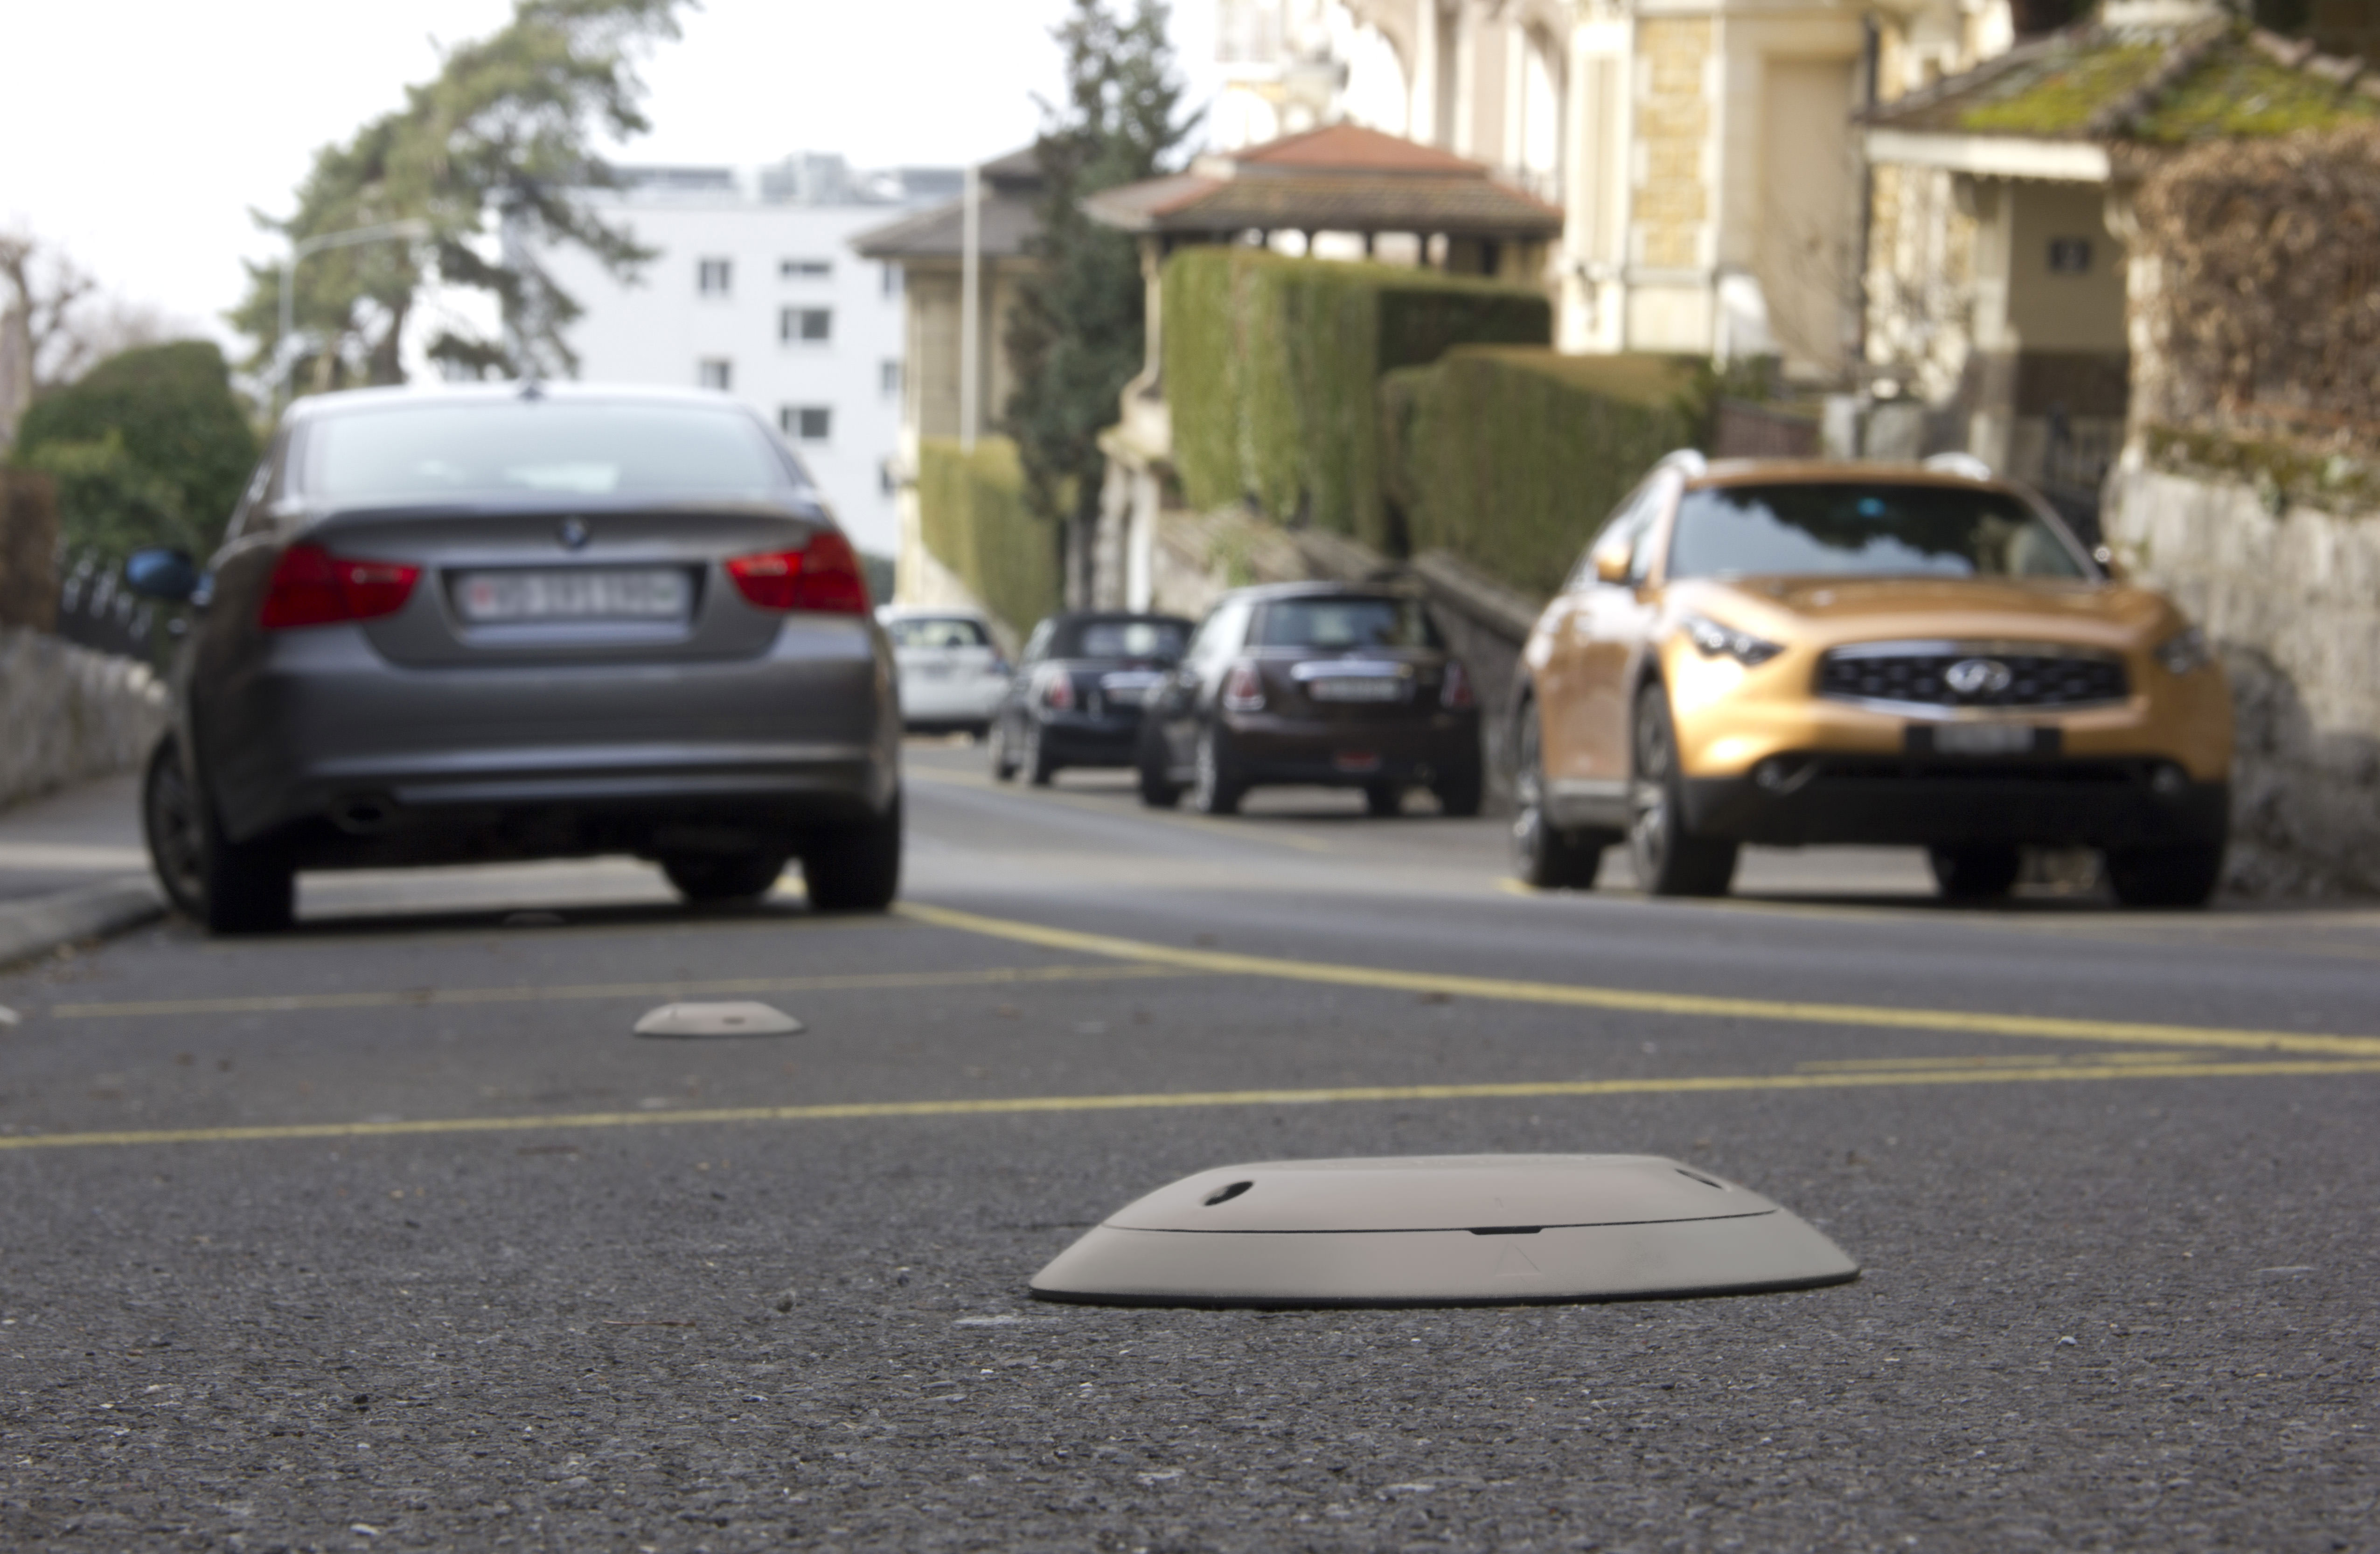 Smart Parking: Tinynode solutions contribute to reduce city traffic ...